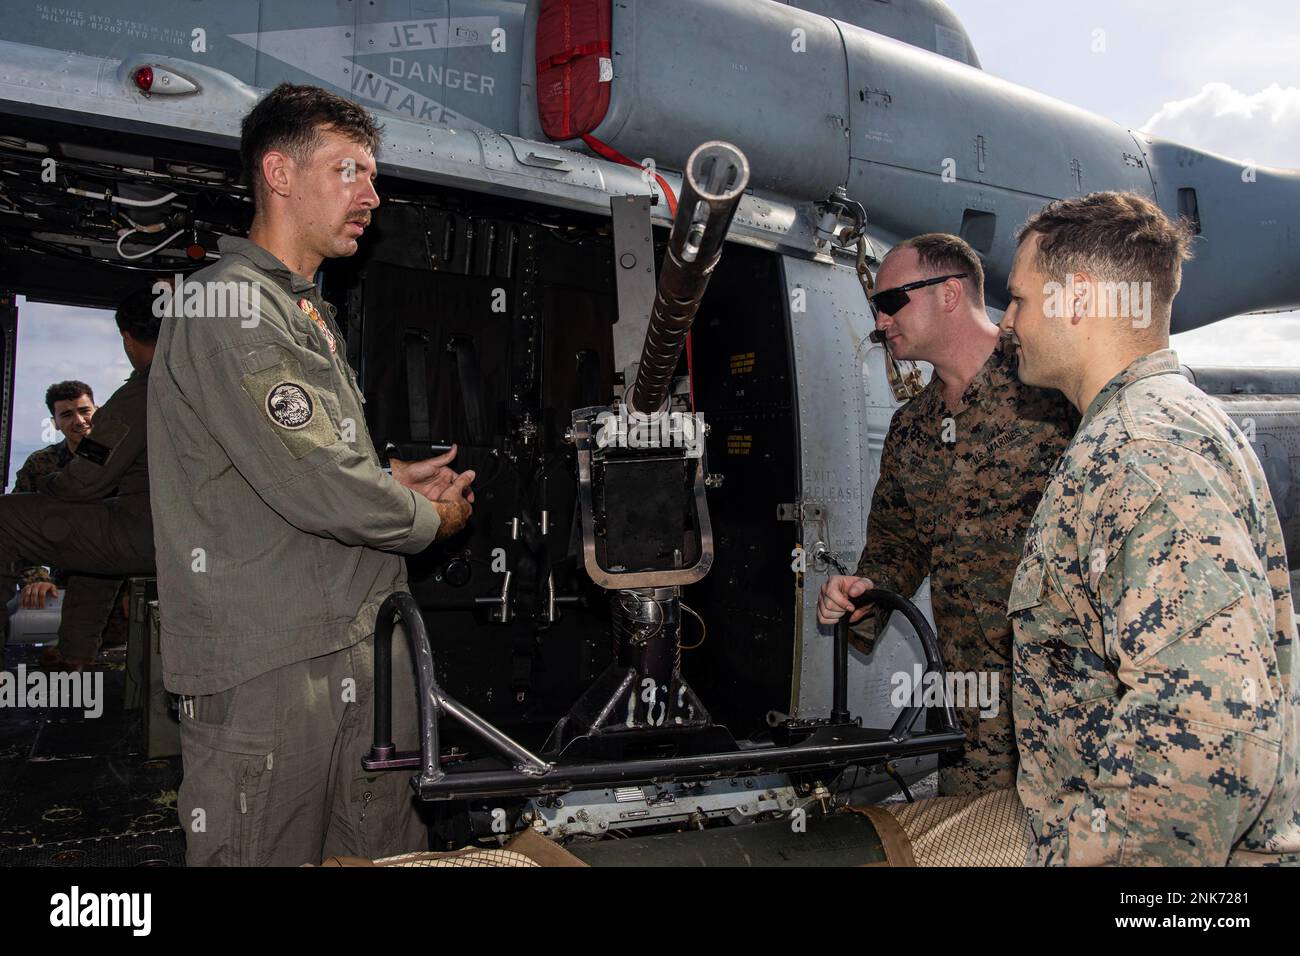 U.S. Marine Corps Sgt. Krecklow, a UH-1Y Huey crew chief with Marine Medium Tiltrotor Squadron 262 (Rein.), 31st Marine Expeditionary Unit, talks about weapon systems during an equipment demonstration aboard USS New Orleans (LPD 18) in the Philippine Sea, Aug. 11, 2022. Apache Company and VMM-262 shared their equipment's capabilties to further improve unit cohesion. The 31st MEU is operating aboard ships of the Tripoli Amphibious Ready Group in the 7th fleet area of operations to enhance interoperability with allies and partners and serve as a ready response force to defend peace and stability Stock Photo